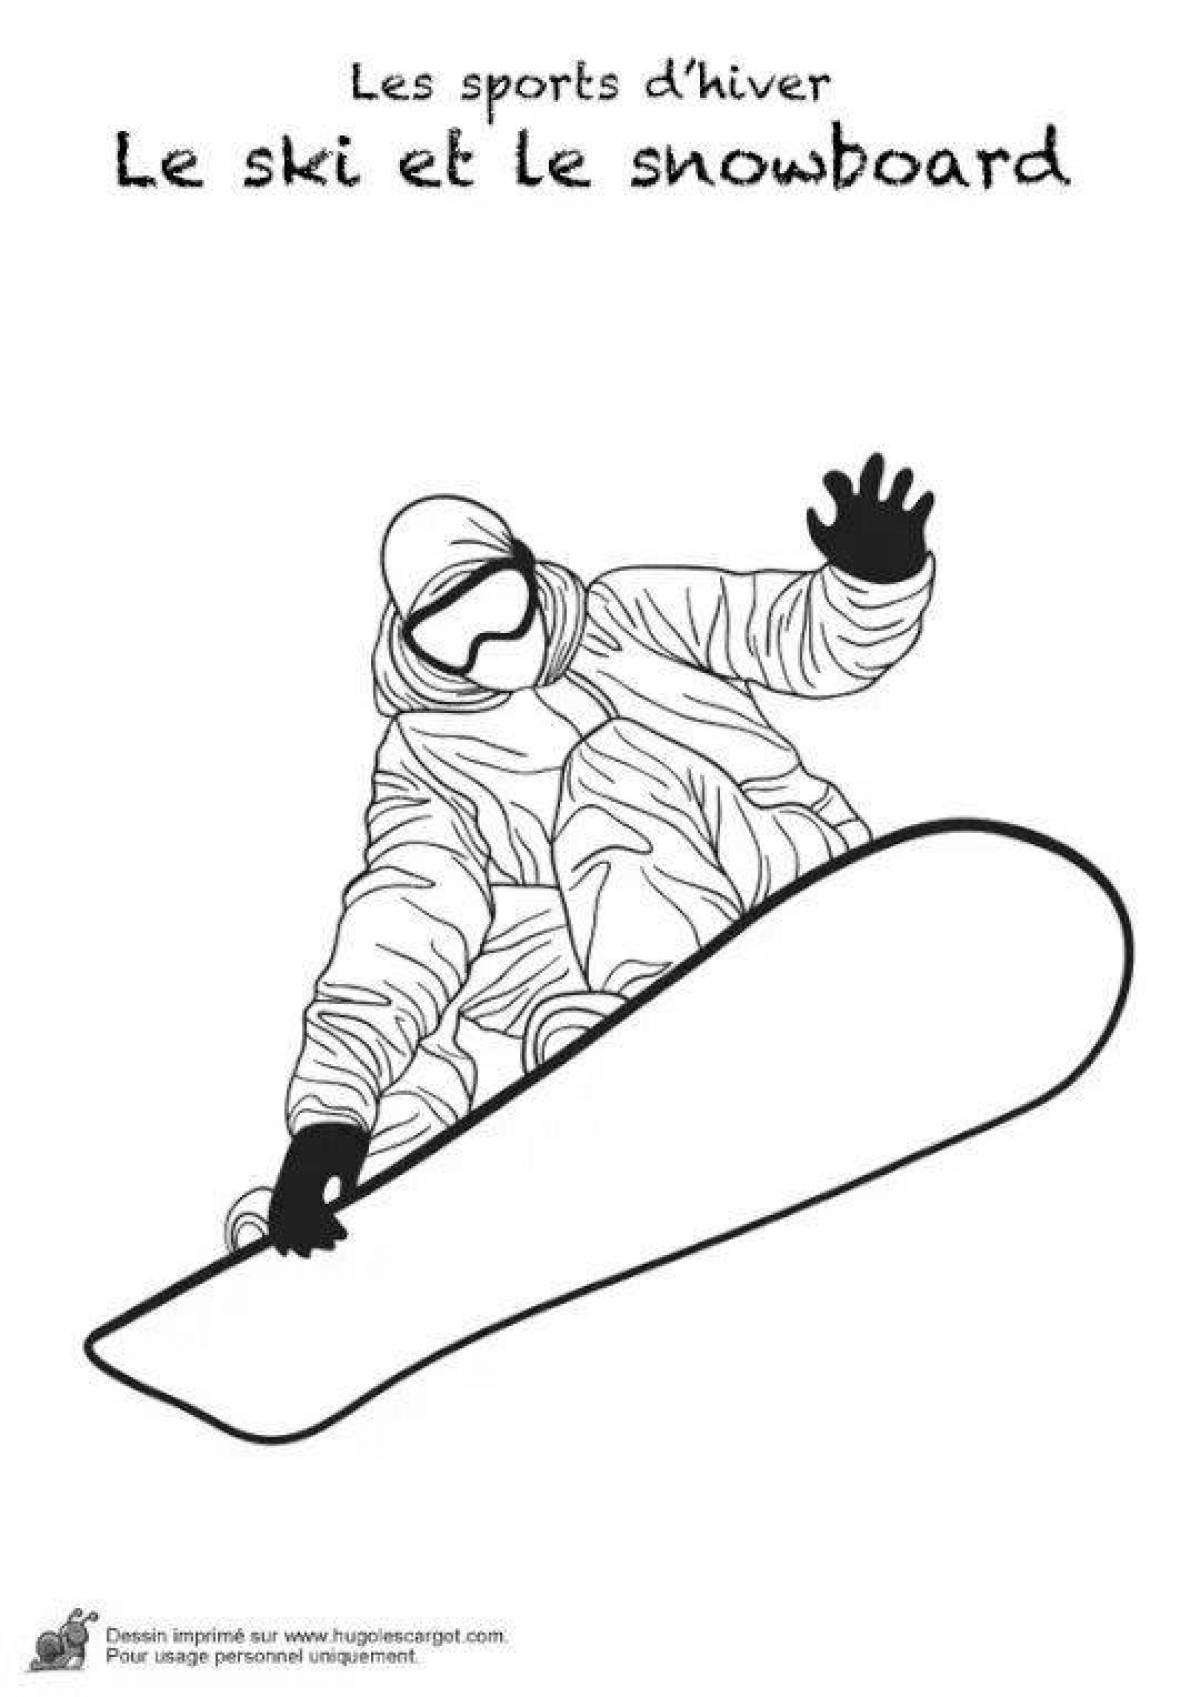 Playful snowboard coloring page